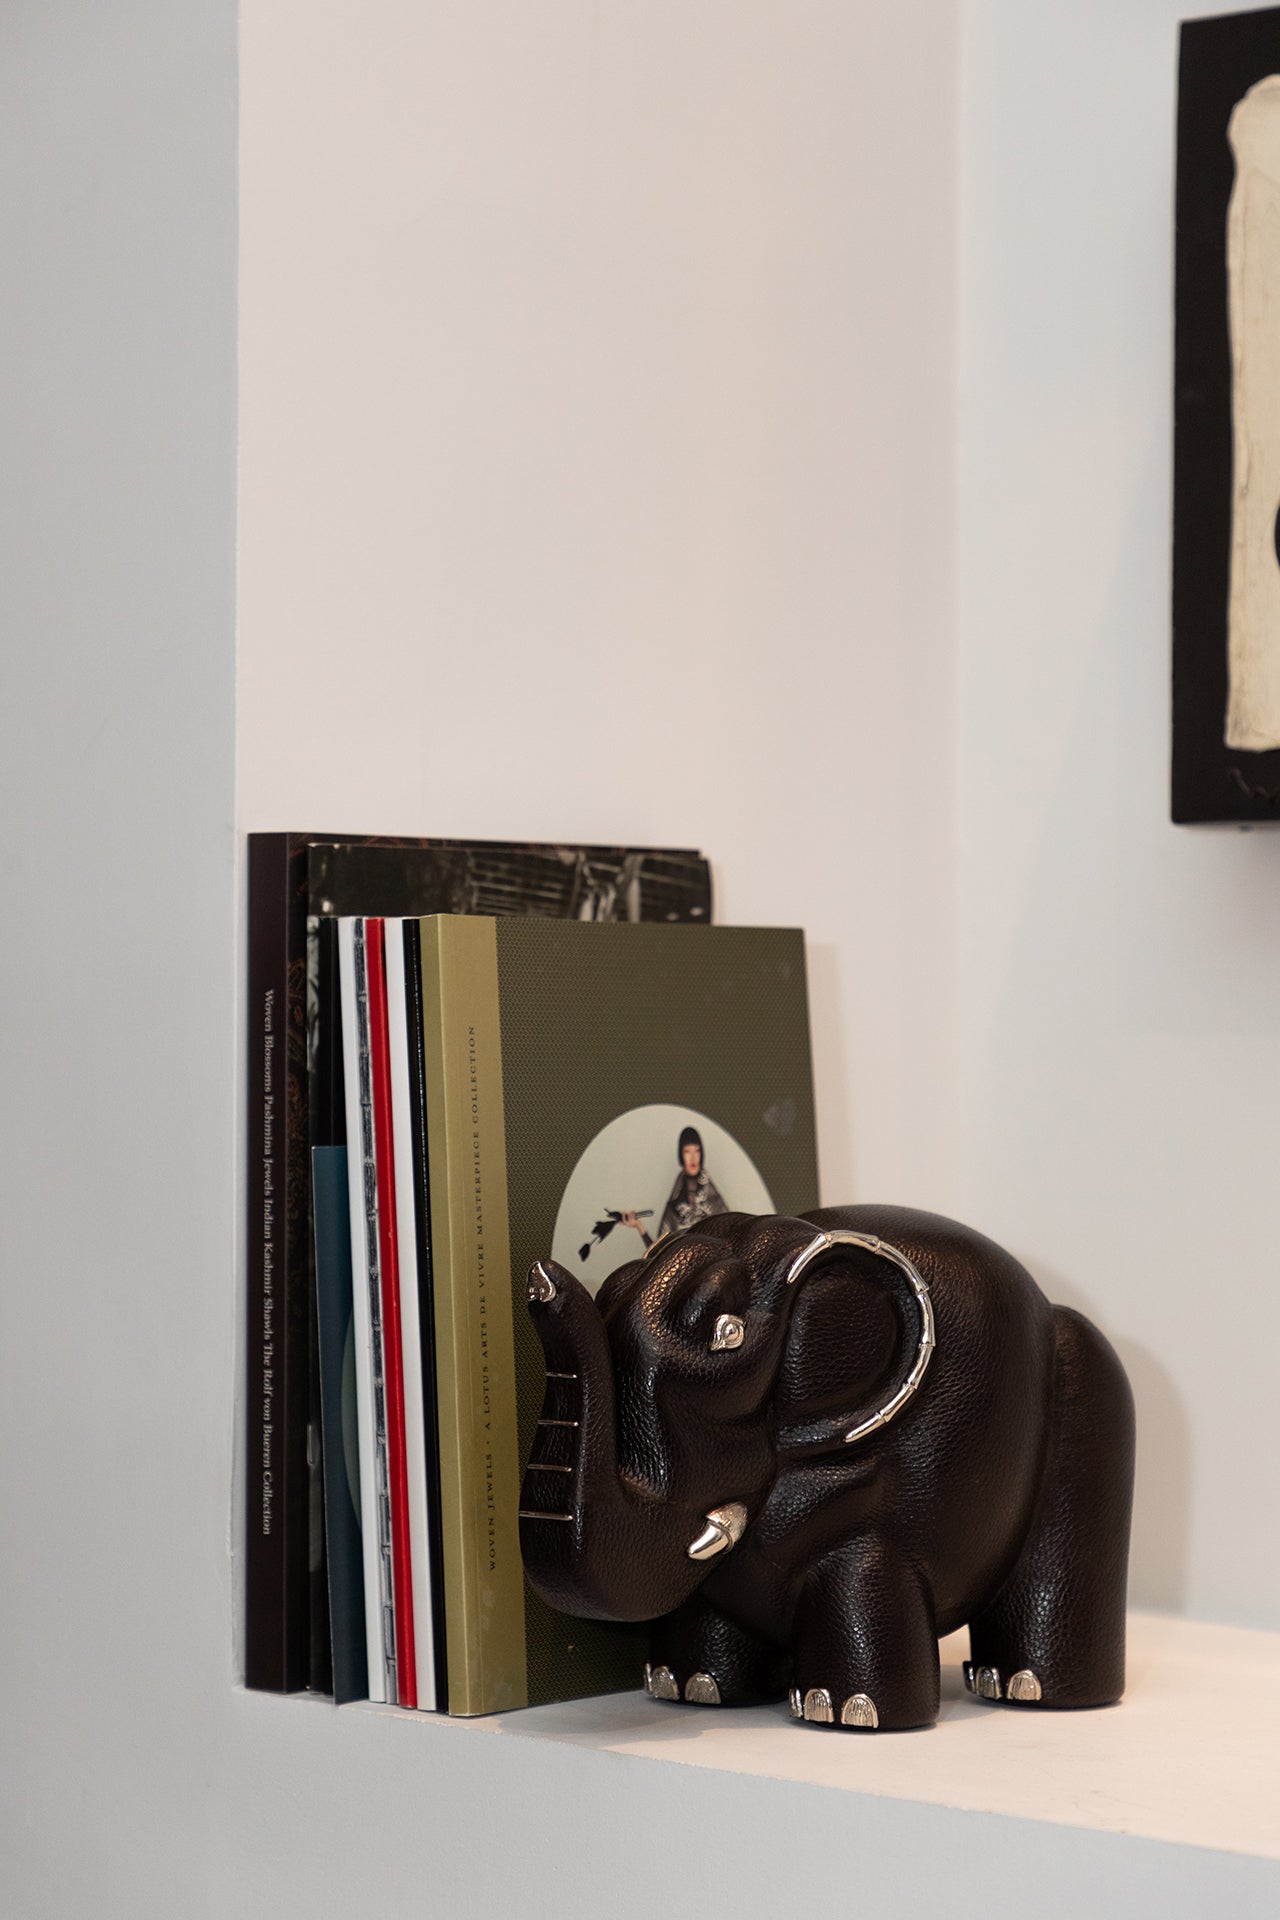 Elephant Paperweight/Bookend